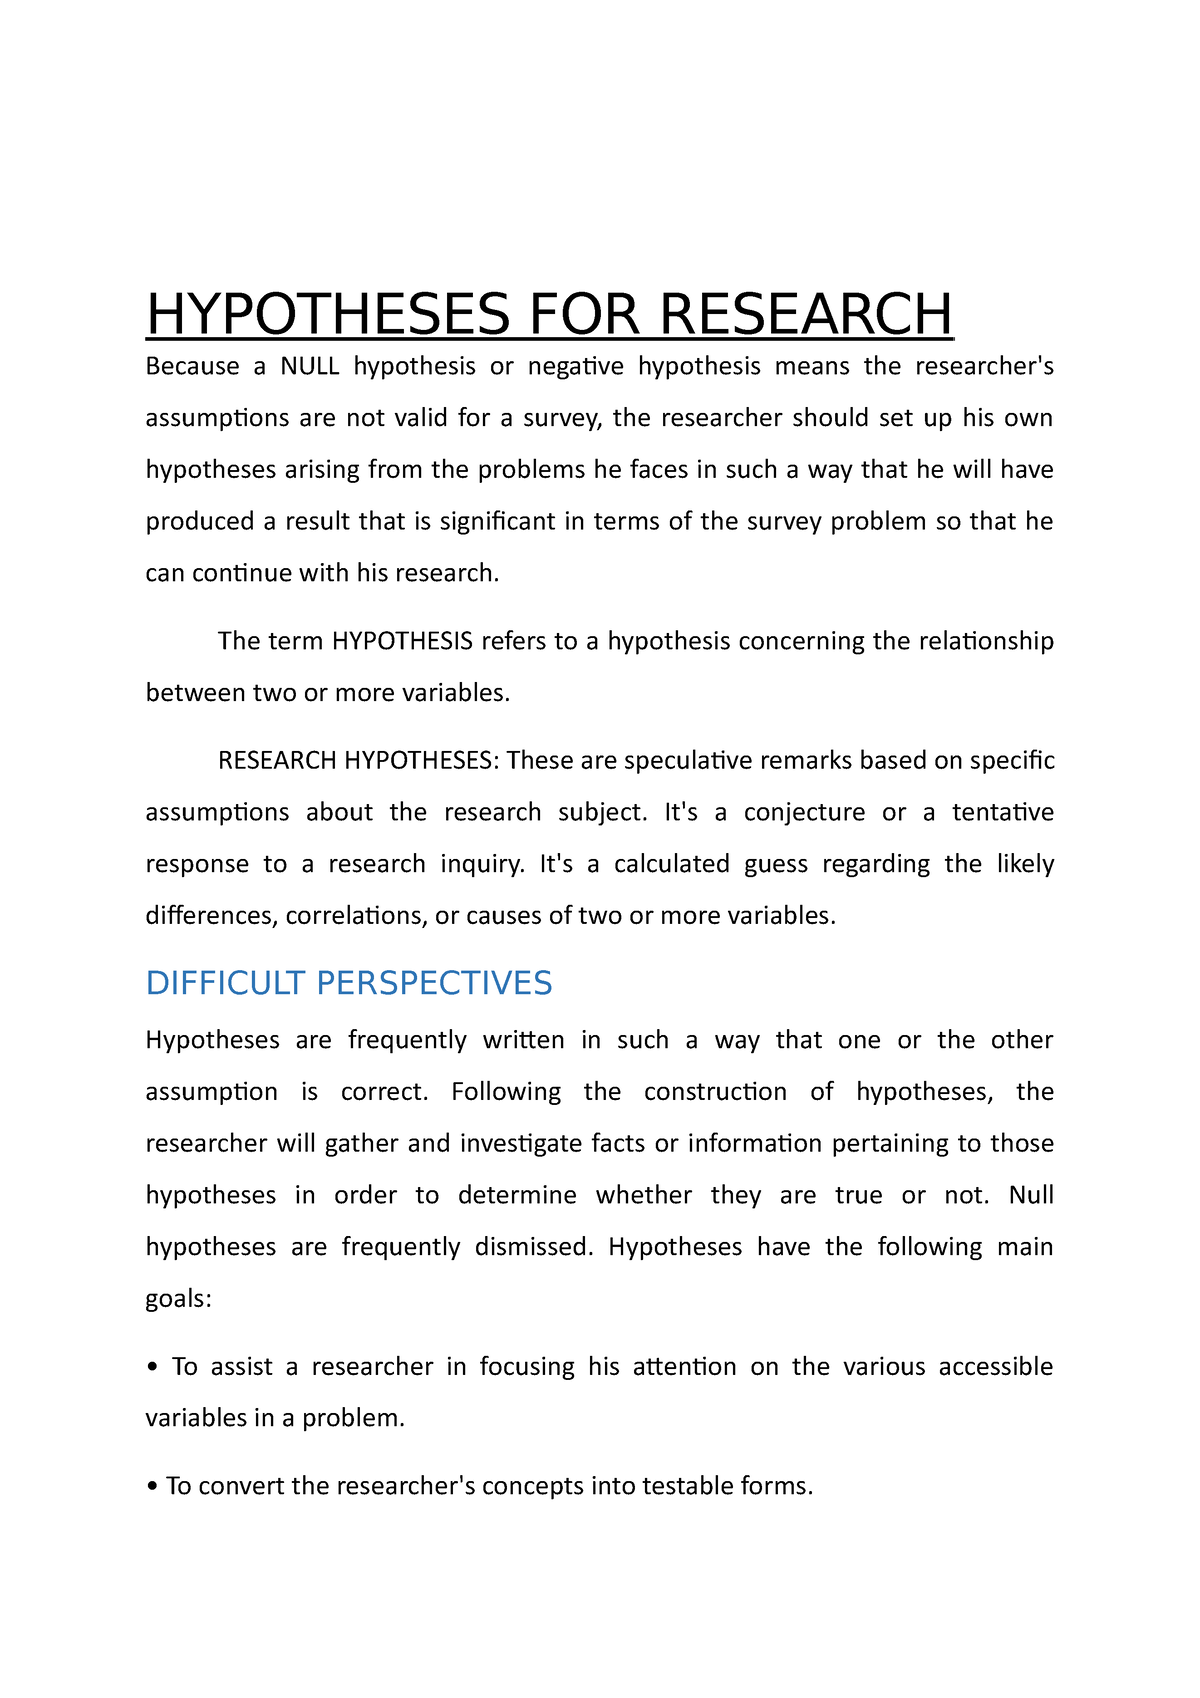 example of negative hypothesis